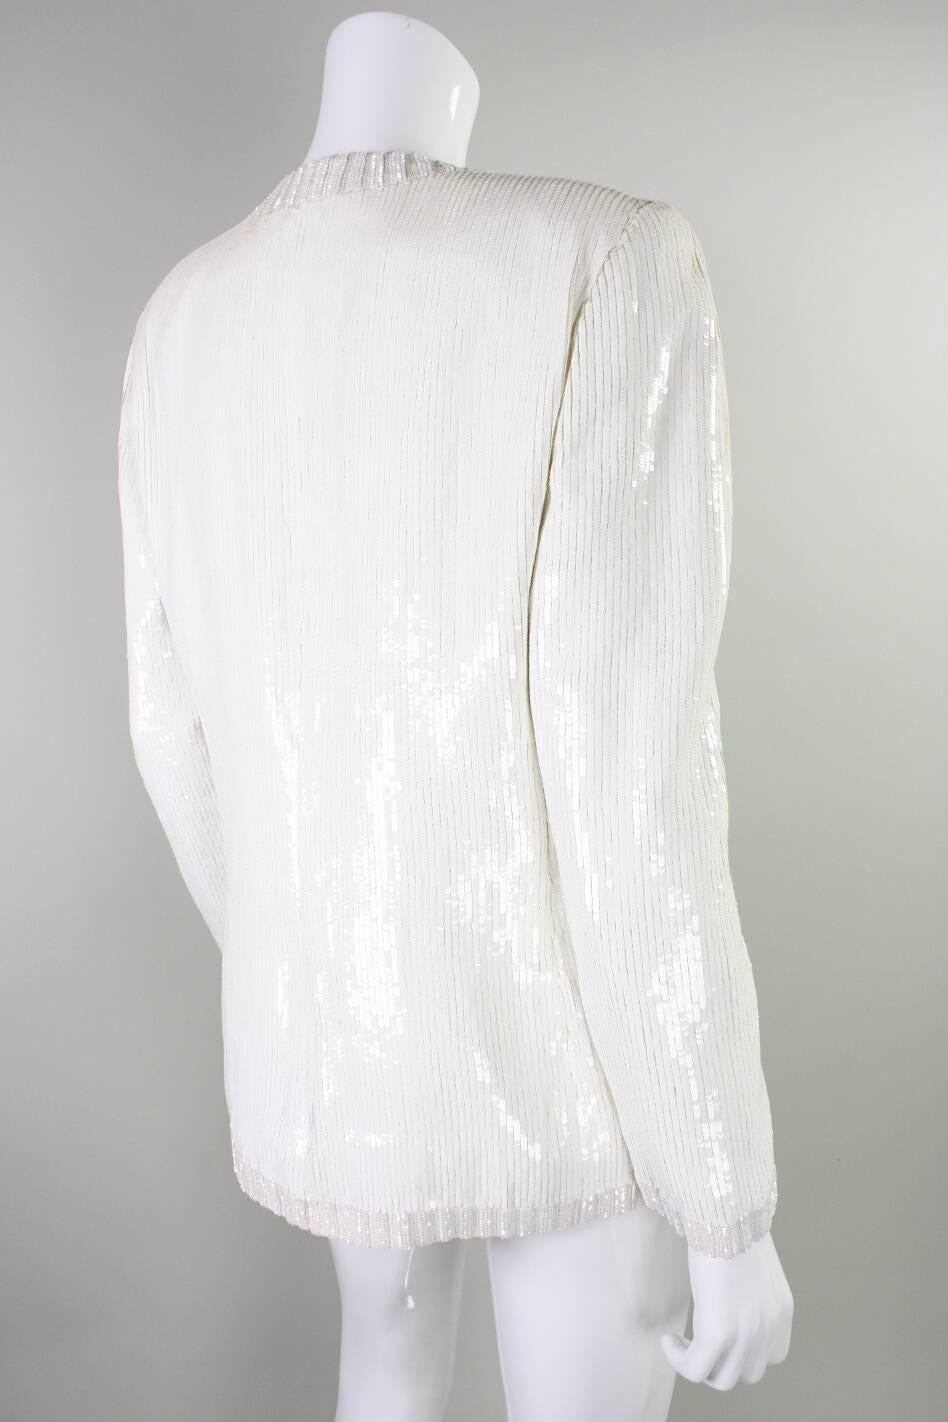 Gray 1980's Bill Blass White Sequined Jacket For Sale